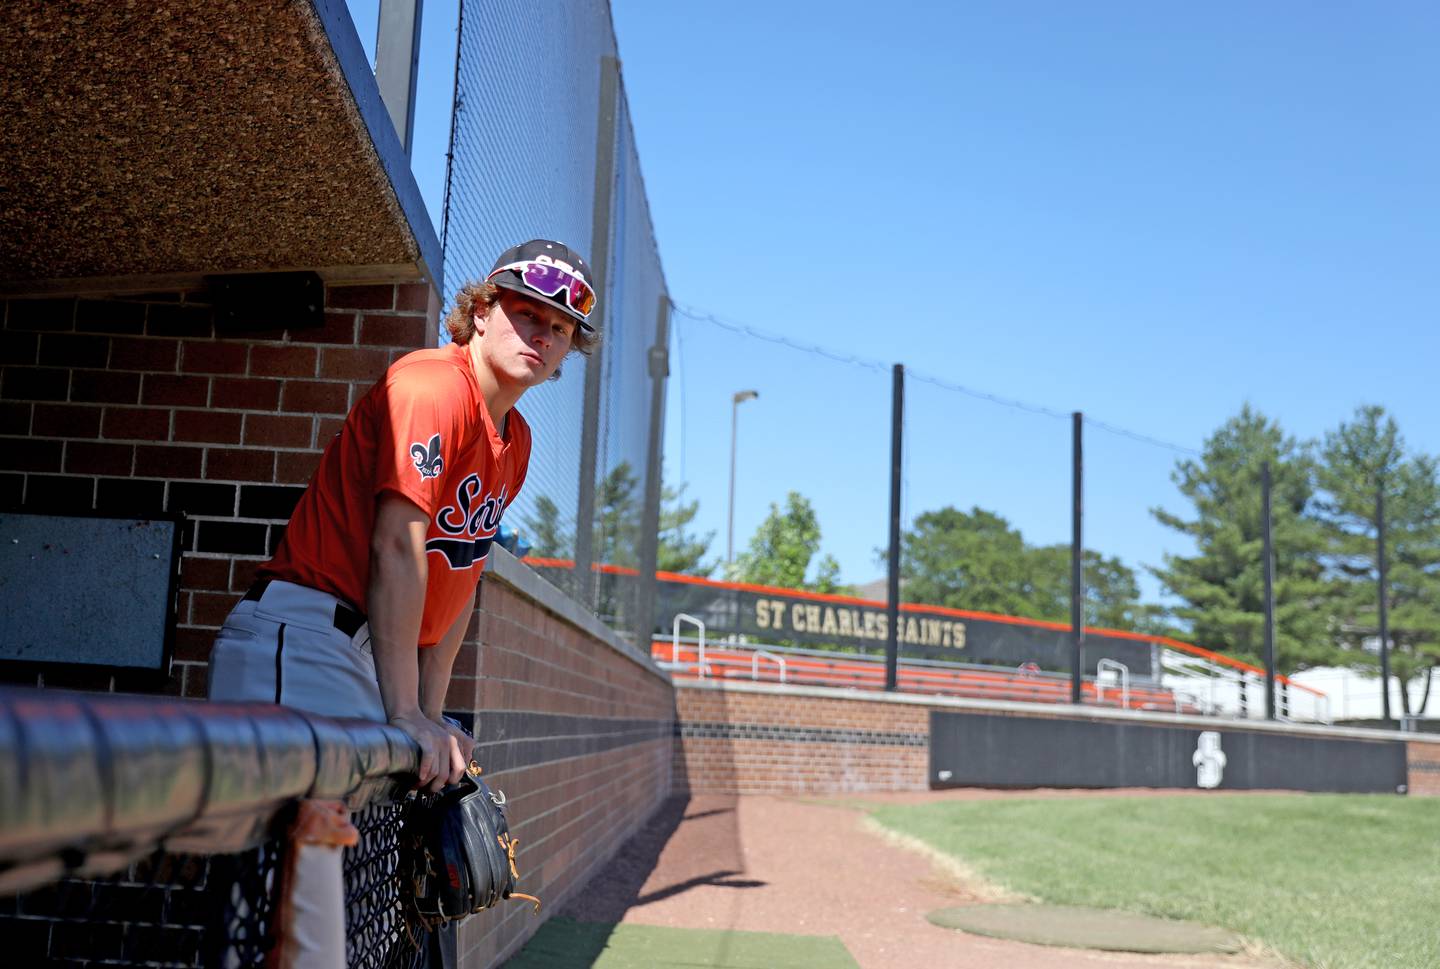 St. Charles East’s Seth Winkler is the Kane County Chronicle 2022 Baseball Player of the Year.